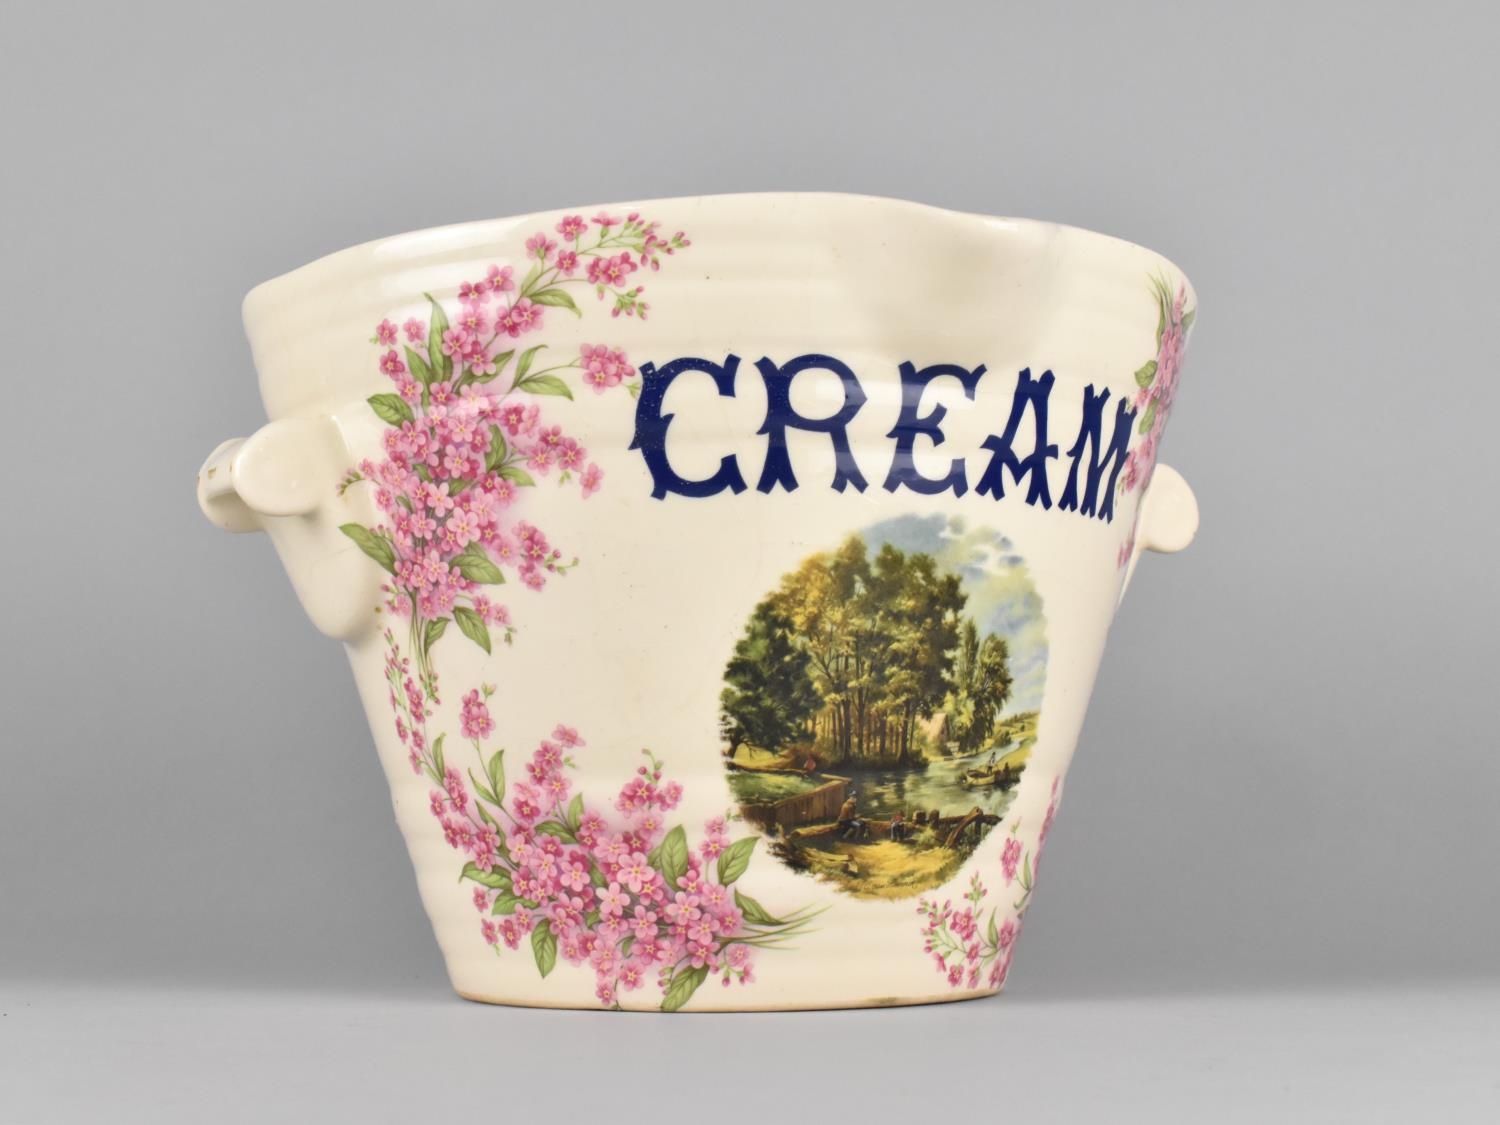 A Ceramic Pail with Printed Decoration, "Cream", 19.5cms High